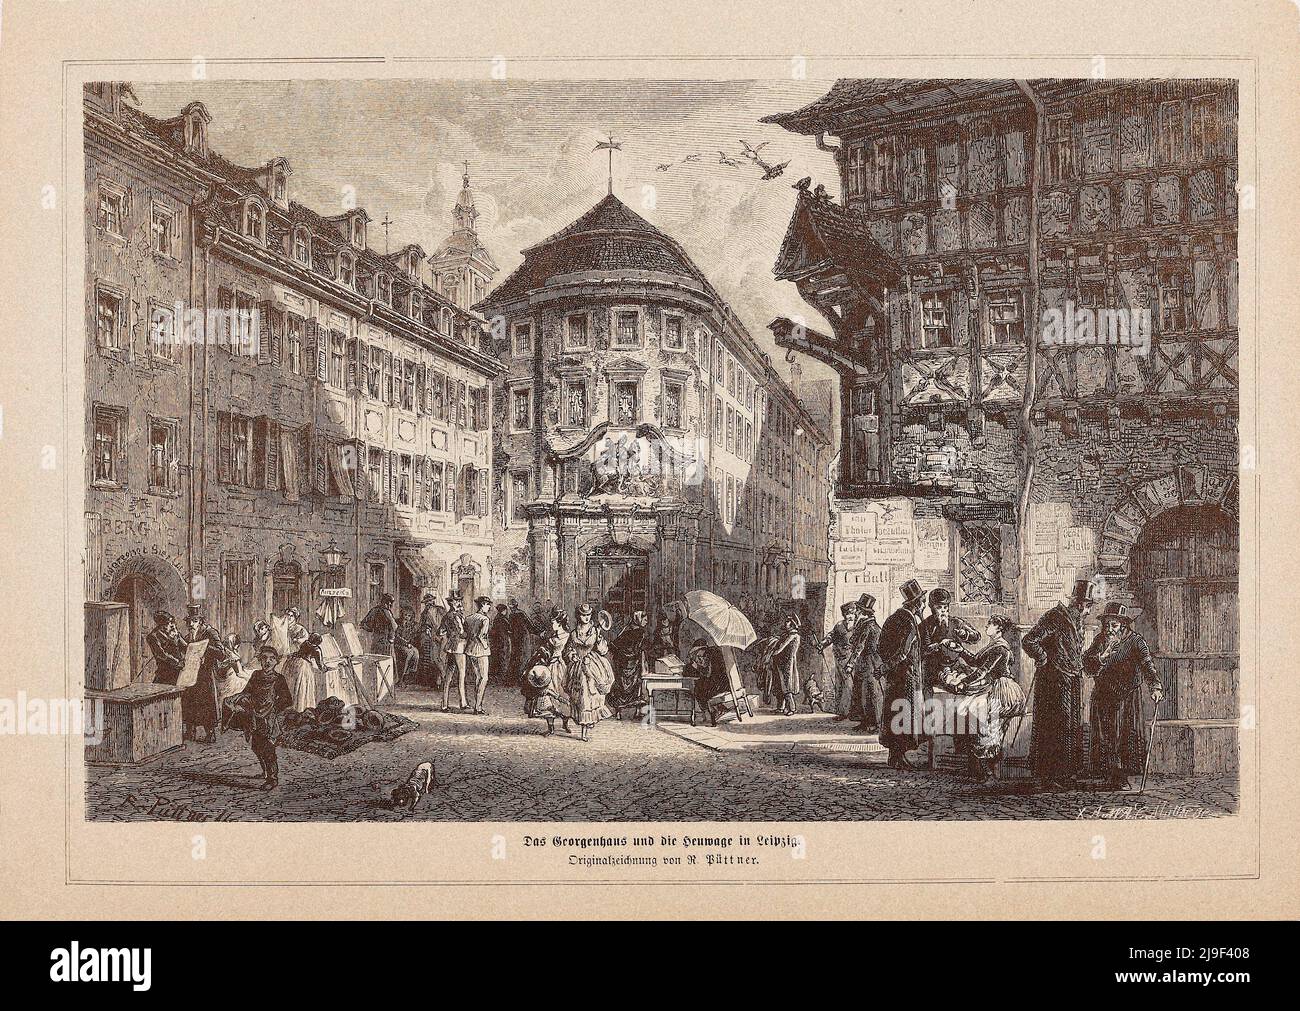 19th-century engraving of Georgenhaus (Hospital St. Georg) and Zur Heuwaage in Leipzig. By Richard Püttner (1842-1913) The Hospital St. Georg (later a Stock Photo